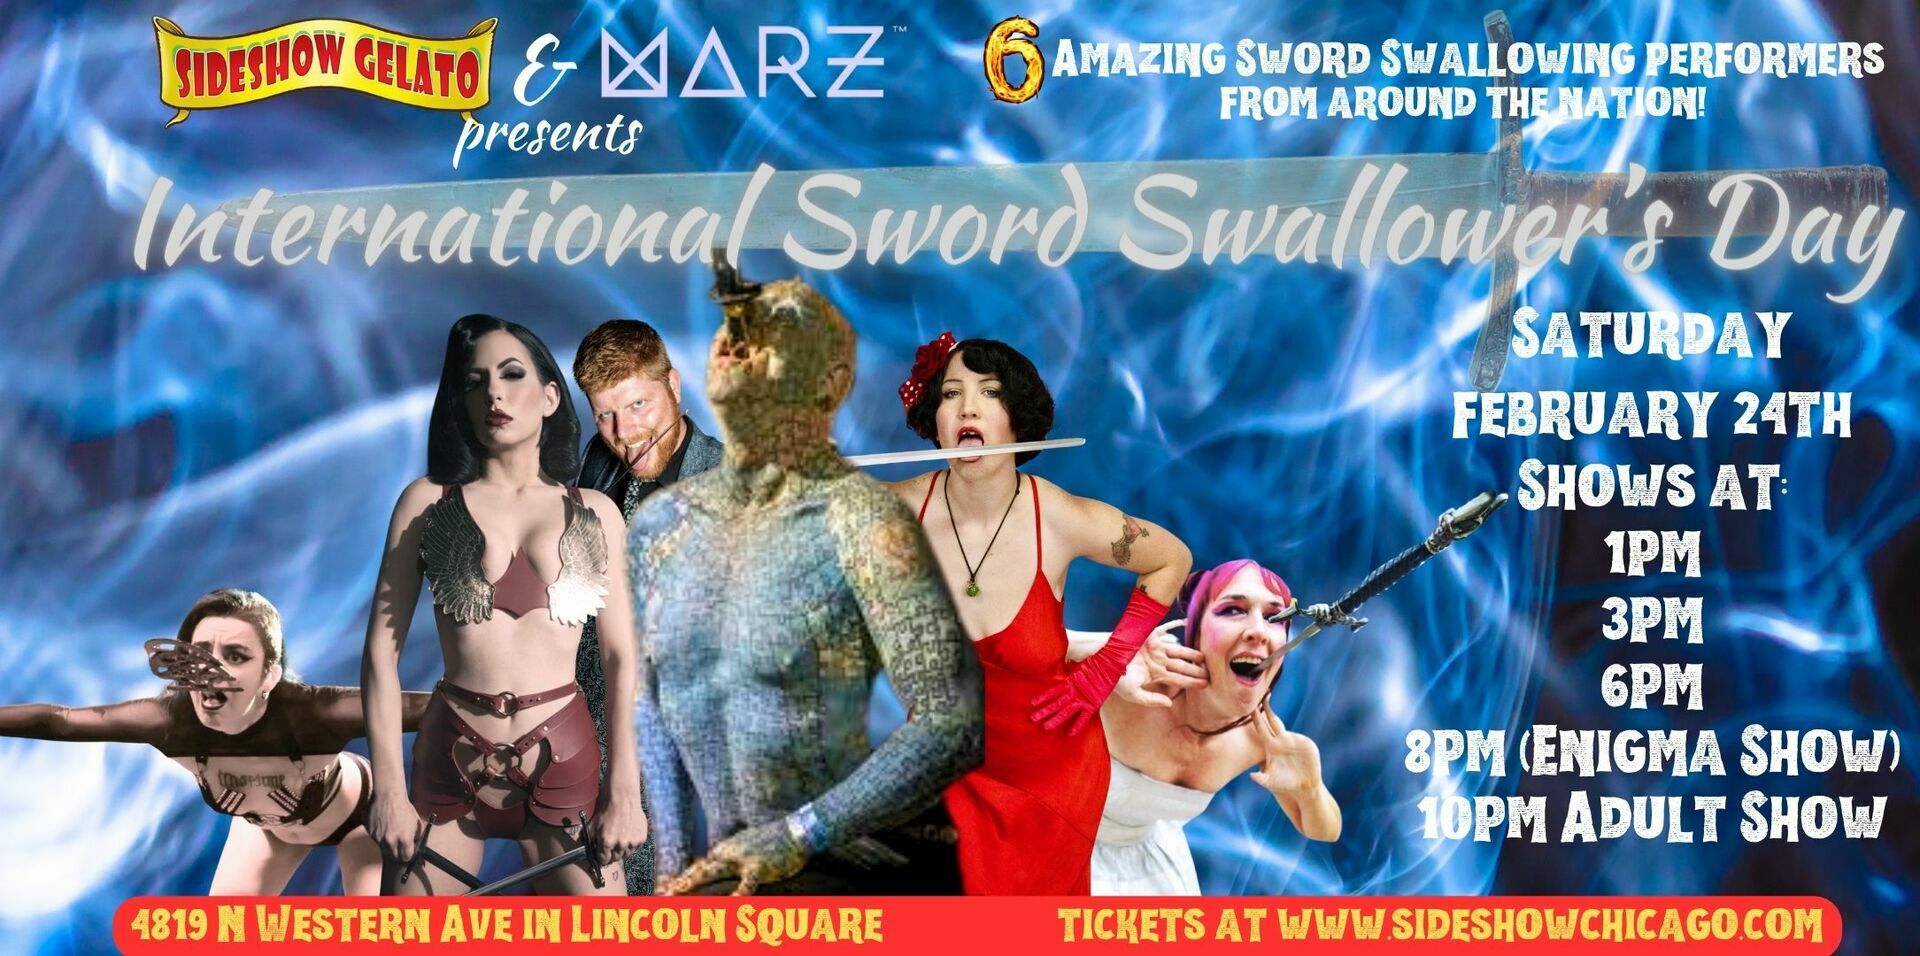 SIDESHOW GELATO and MARZ BREWING presents INTERNATIONAL SWORD SWALLOWERS DAY!, Chicago, Illinois, United States